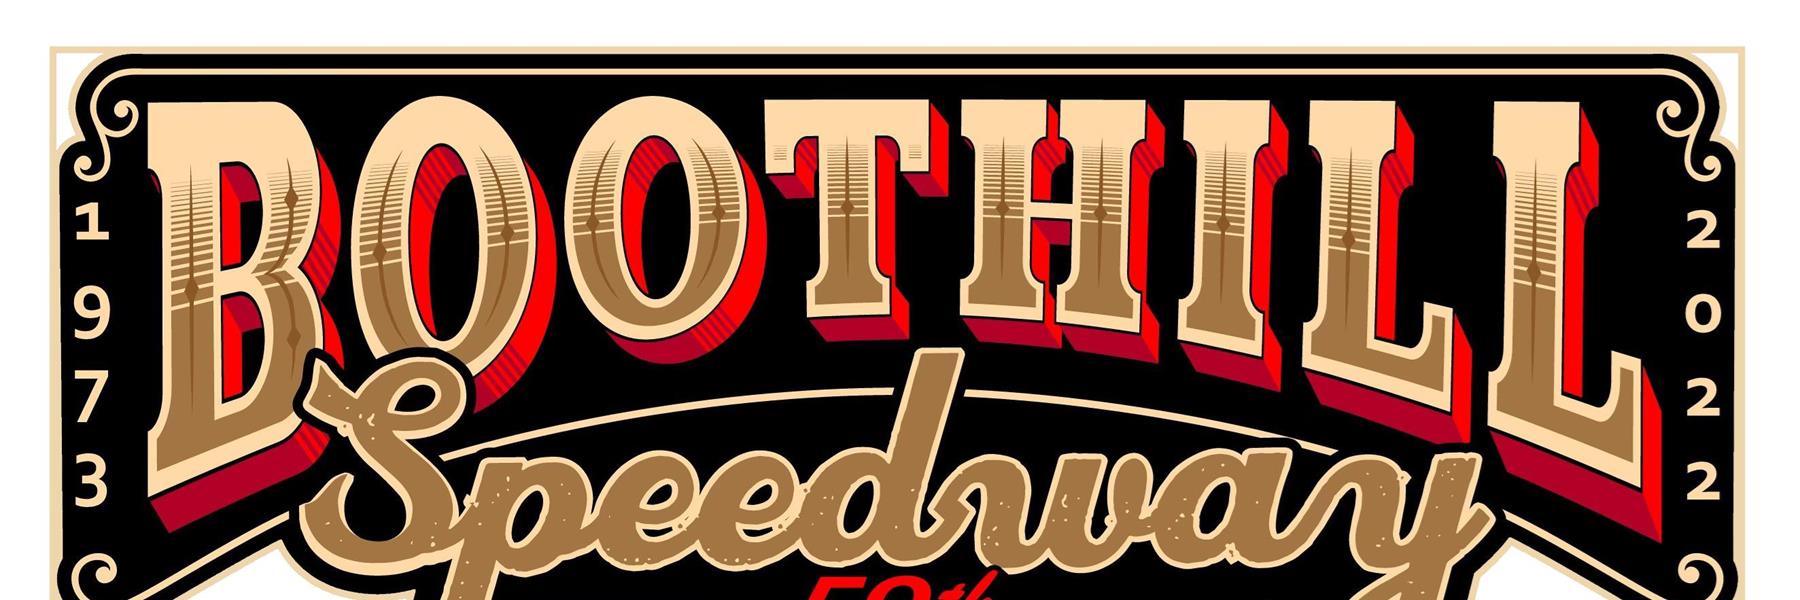 9/10/2022 - Boothill Speedway